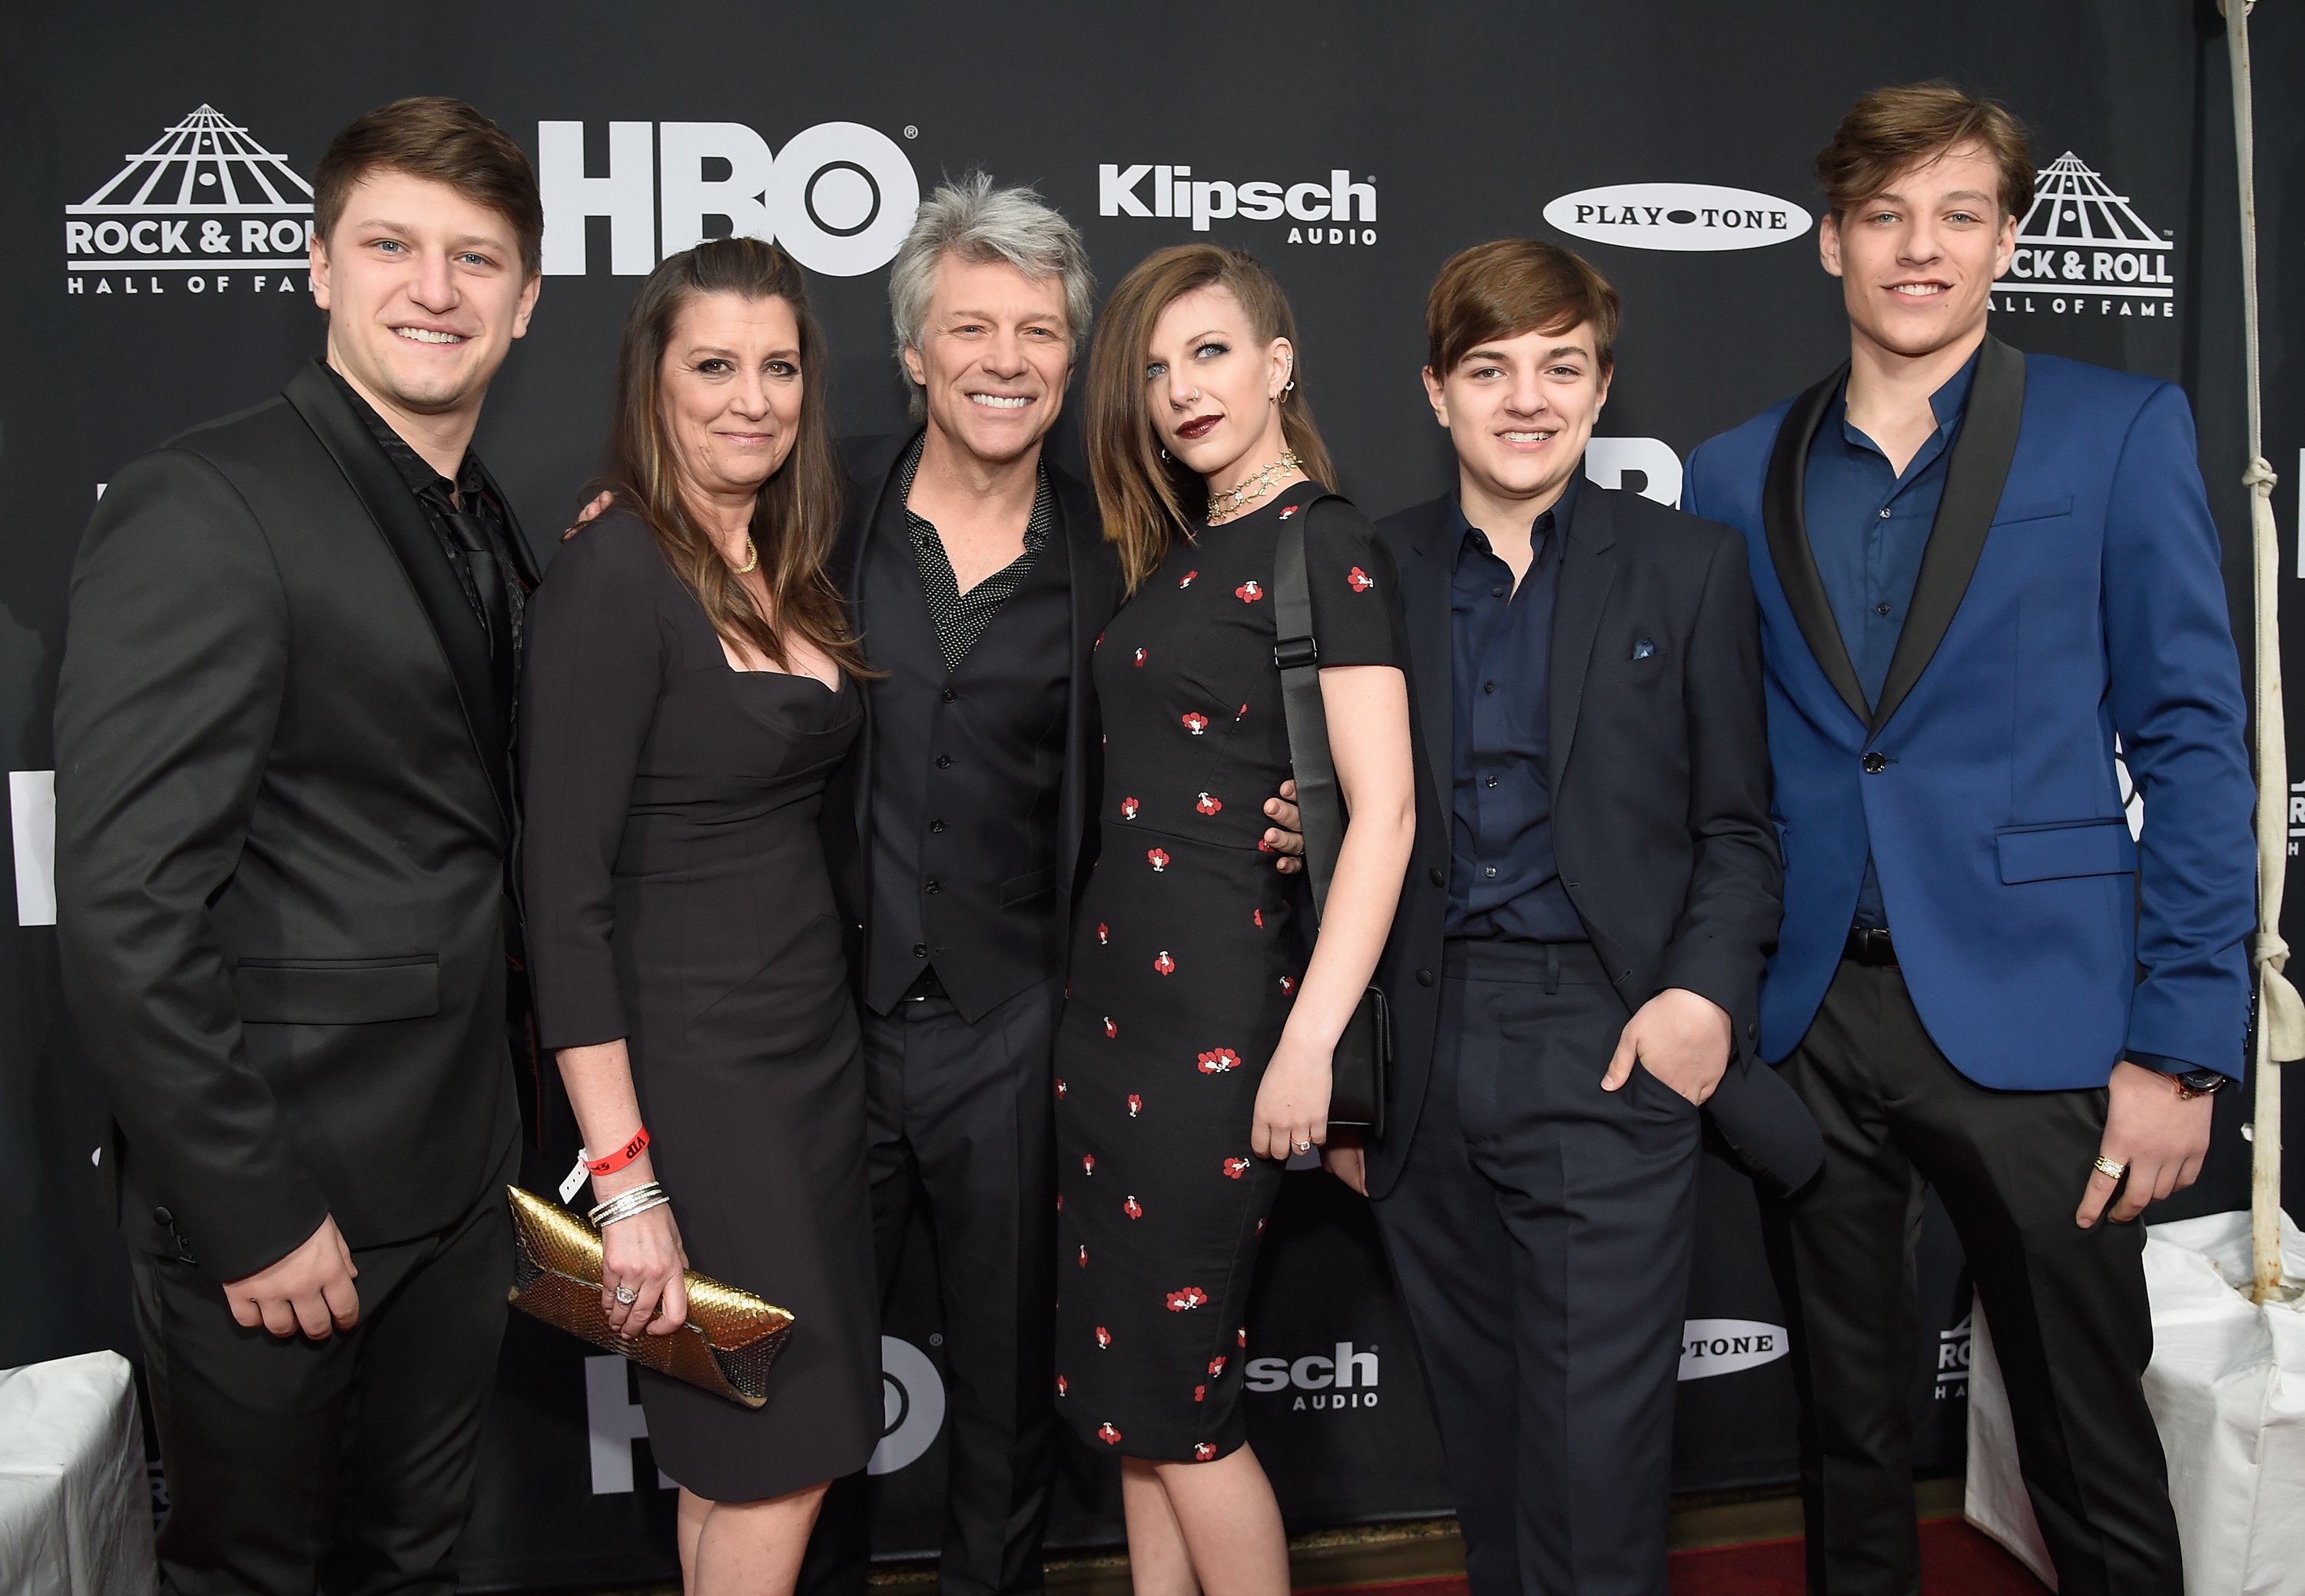 Inductee Jon Bon Jovi and family during the 33rd Annual Rock & Roll Hall of Fame Induction Ceremony at Public Auditorium on April 14, 2018 in Cleveland, Ohio. / Source: Getty Images